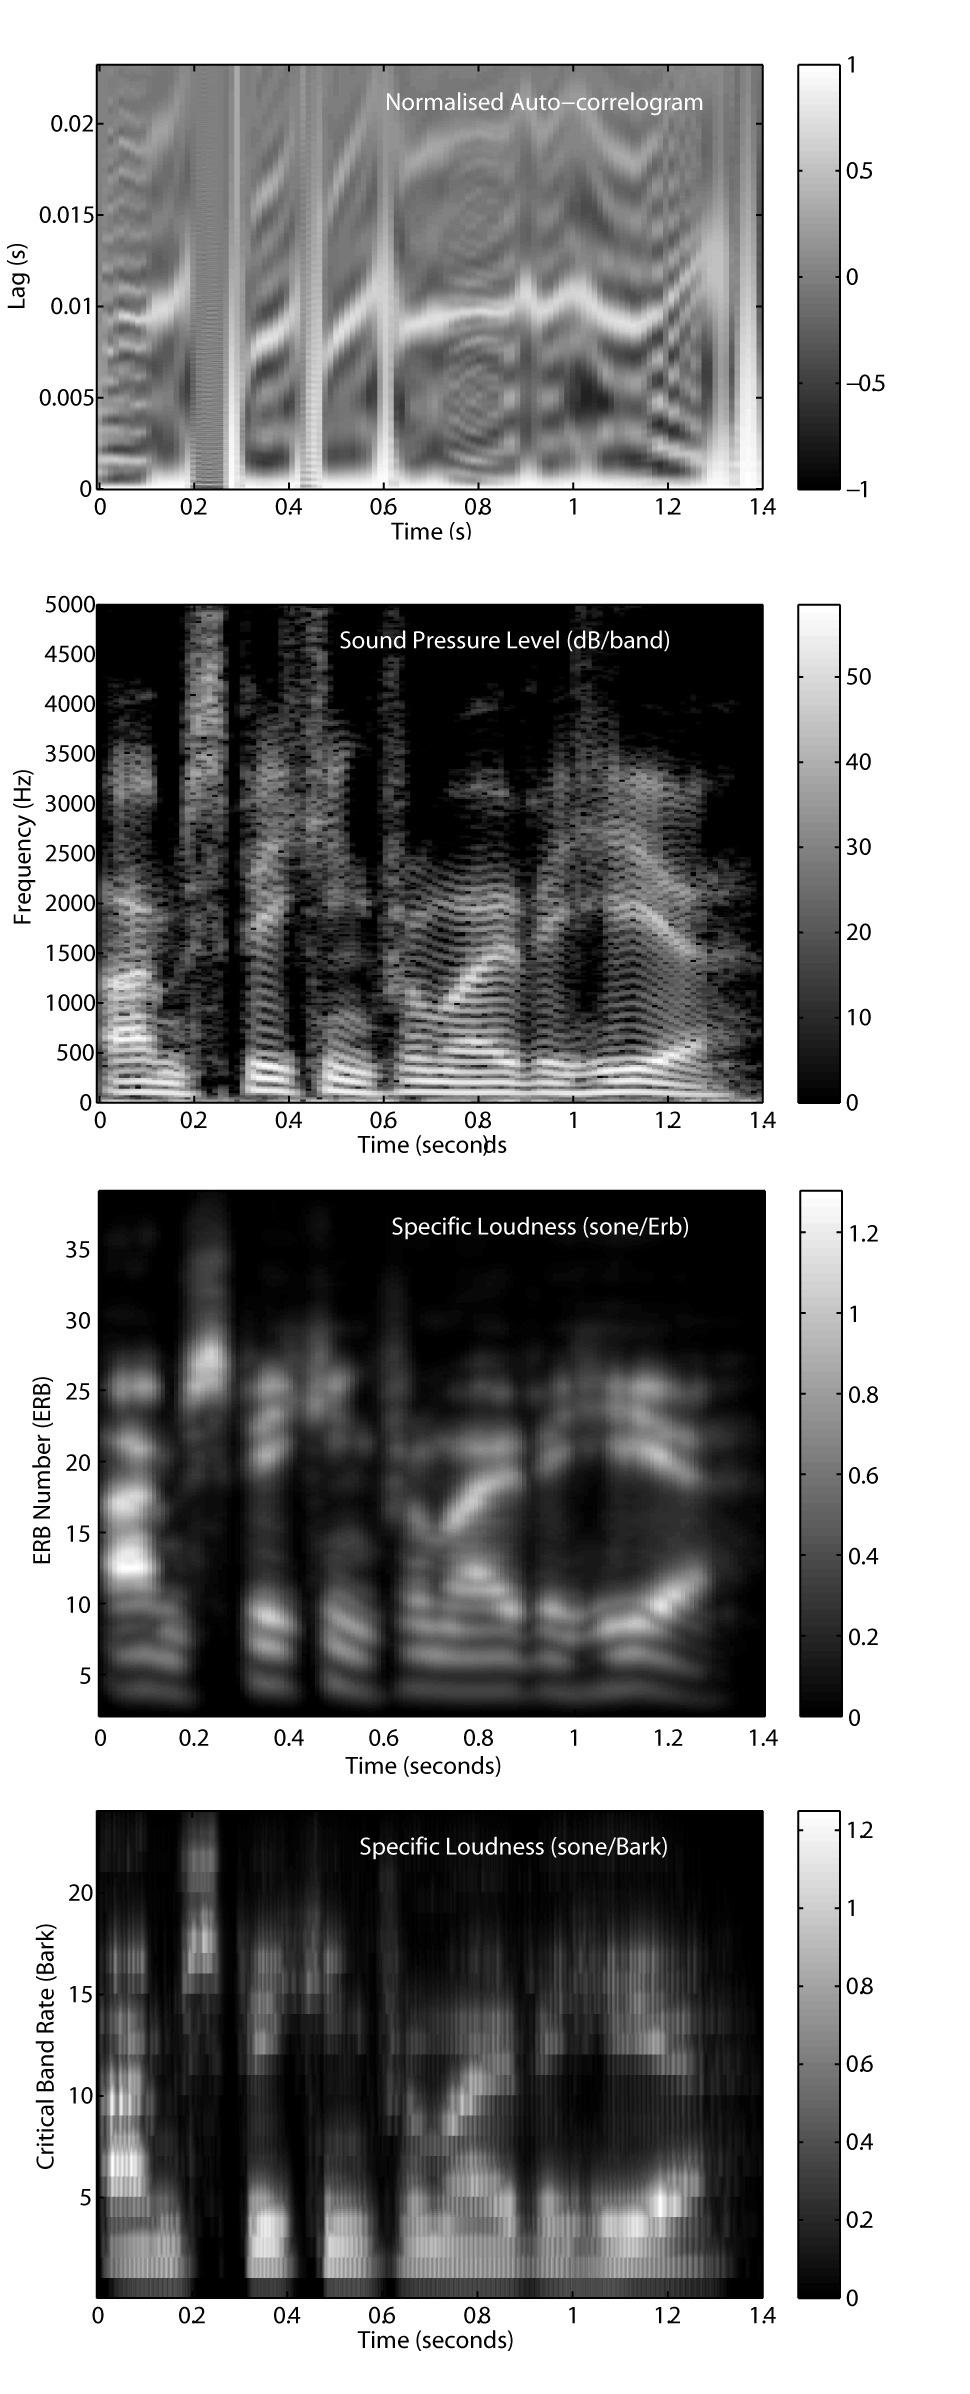 Proceedings of ACOUSTICS 2008 well as the exponential reverberation decay in the case of reverberant speech.